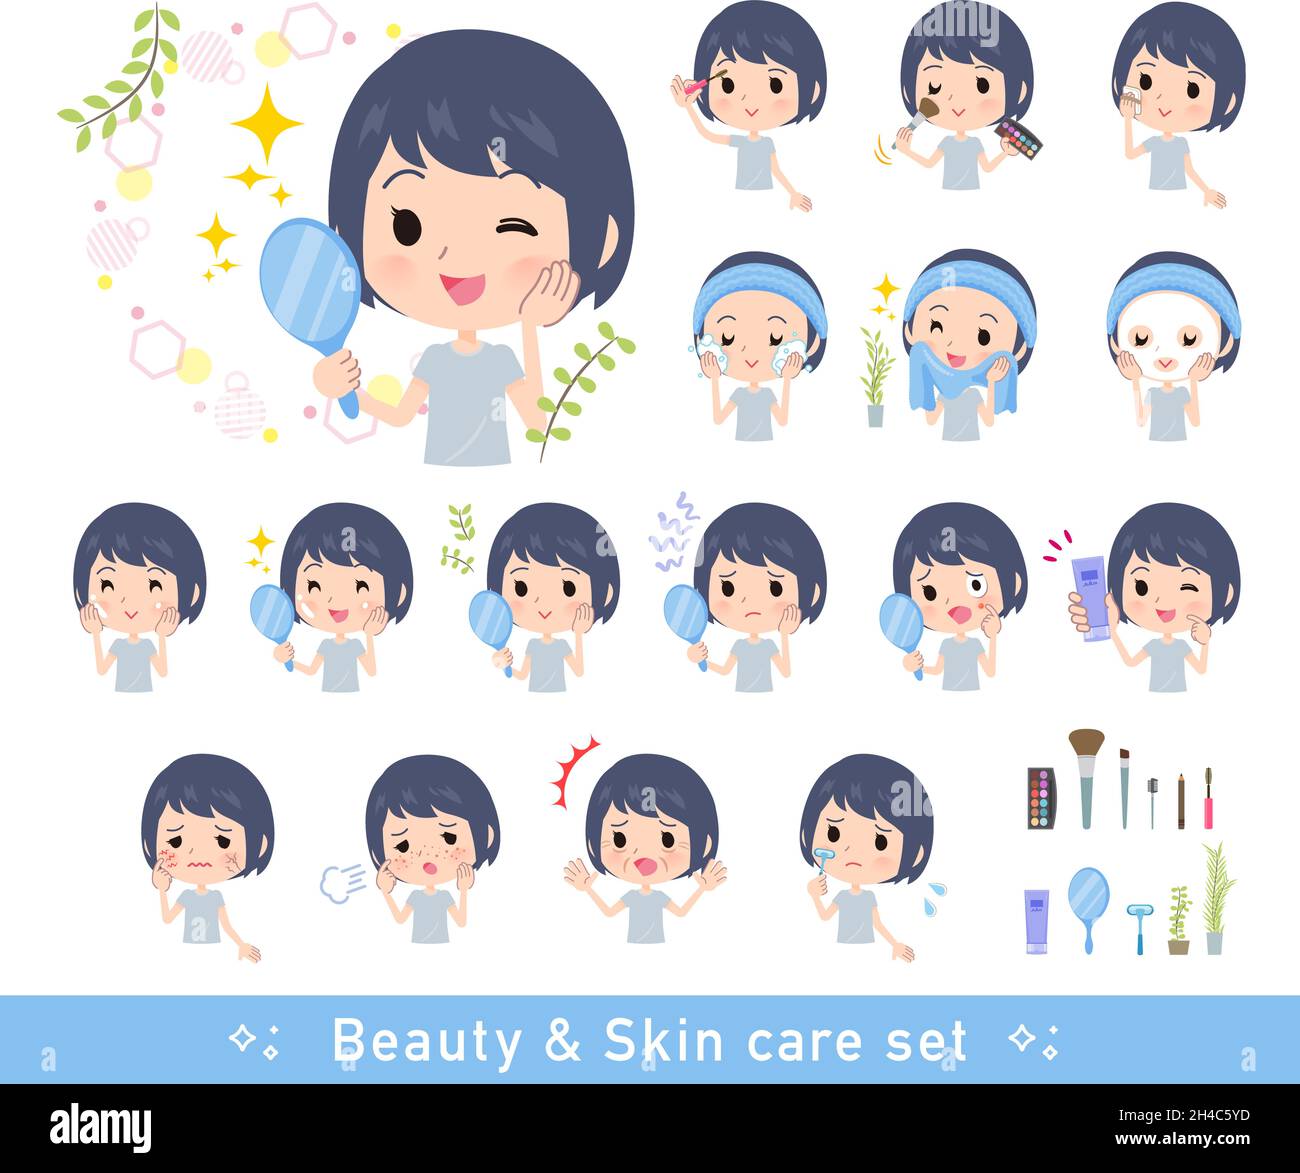 A set of unpaid avatar women on beauty.There are various actions such as skin care and makeup.It's vector art so easy to edit. Stock Vector